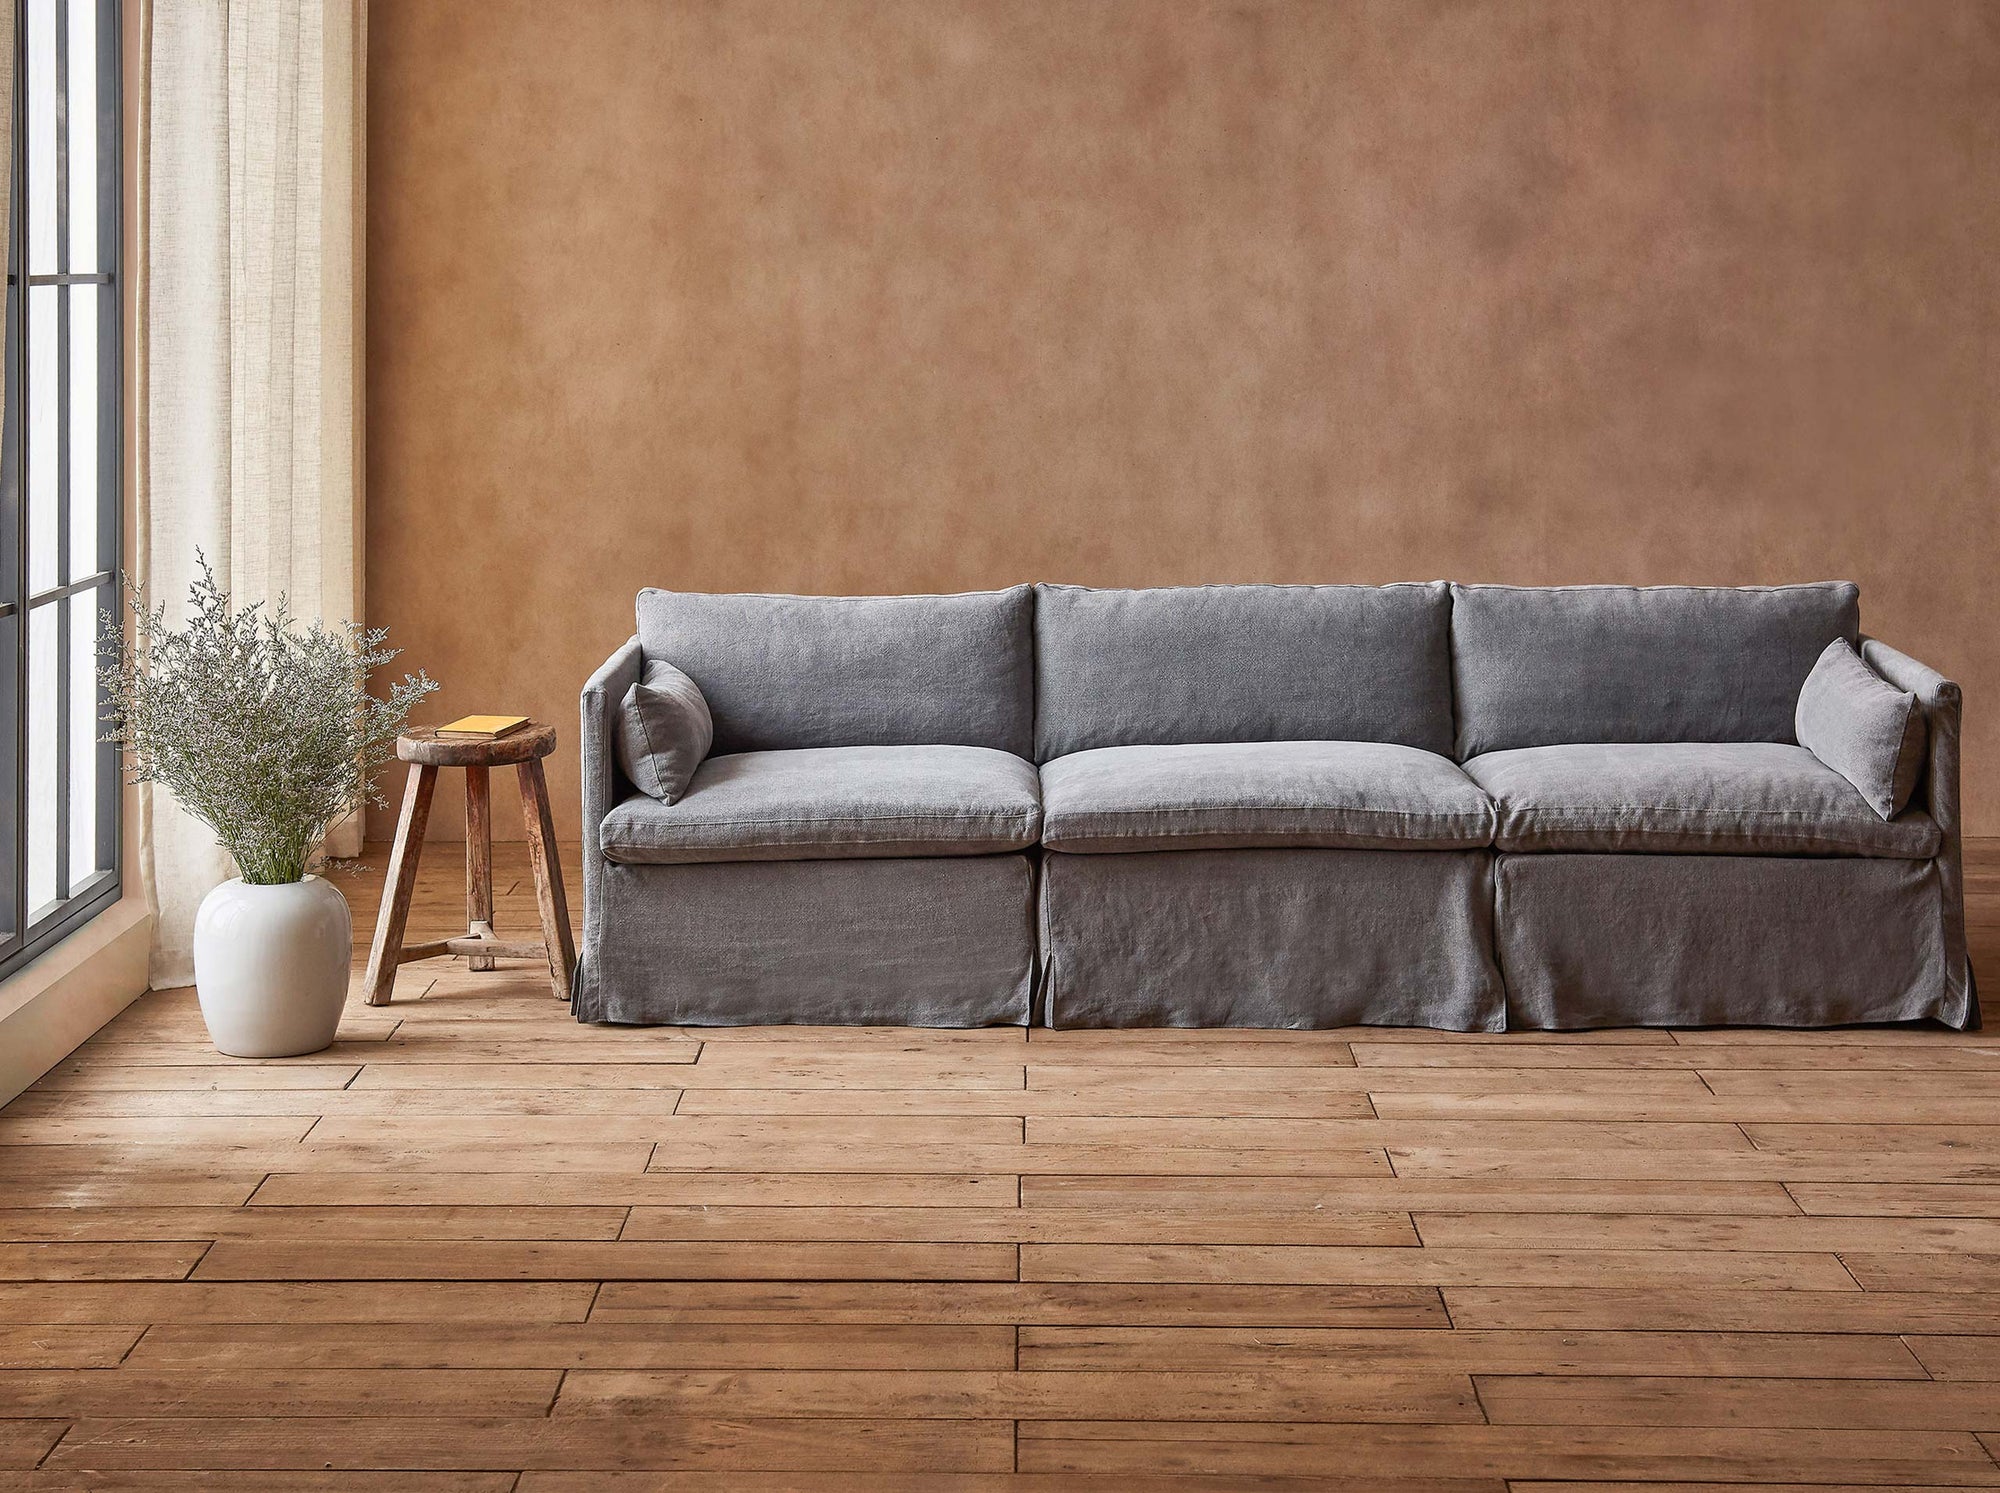 Gabriel Sectional Sofa in Ink Cap, a medium cool grey Light Weight Linen, placed in a sunlit room next to a stool